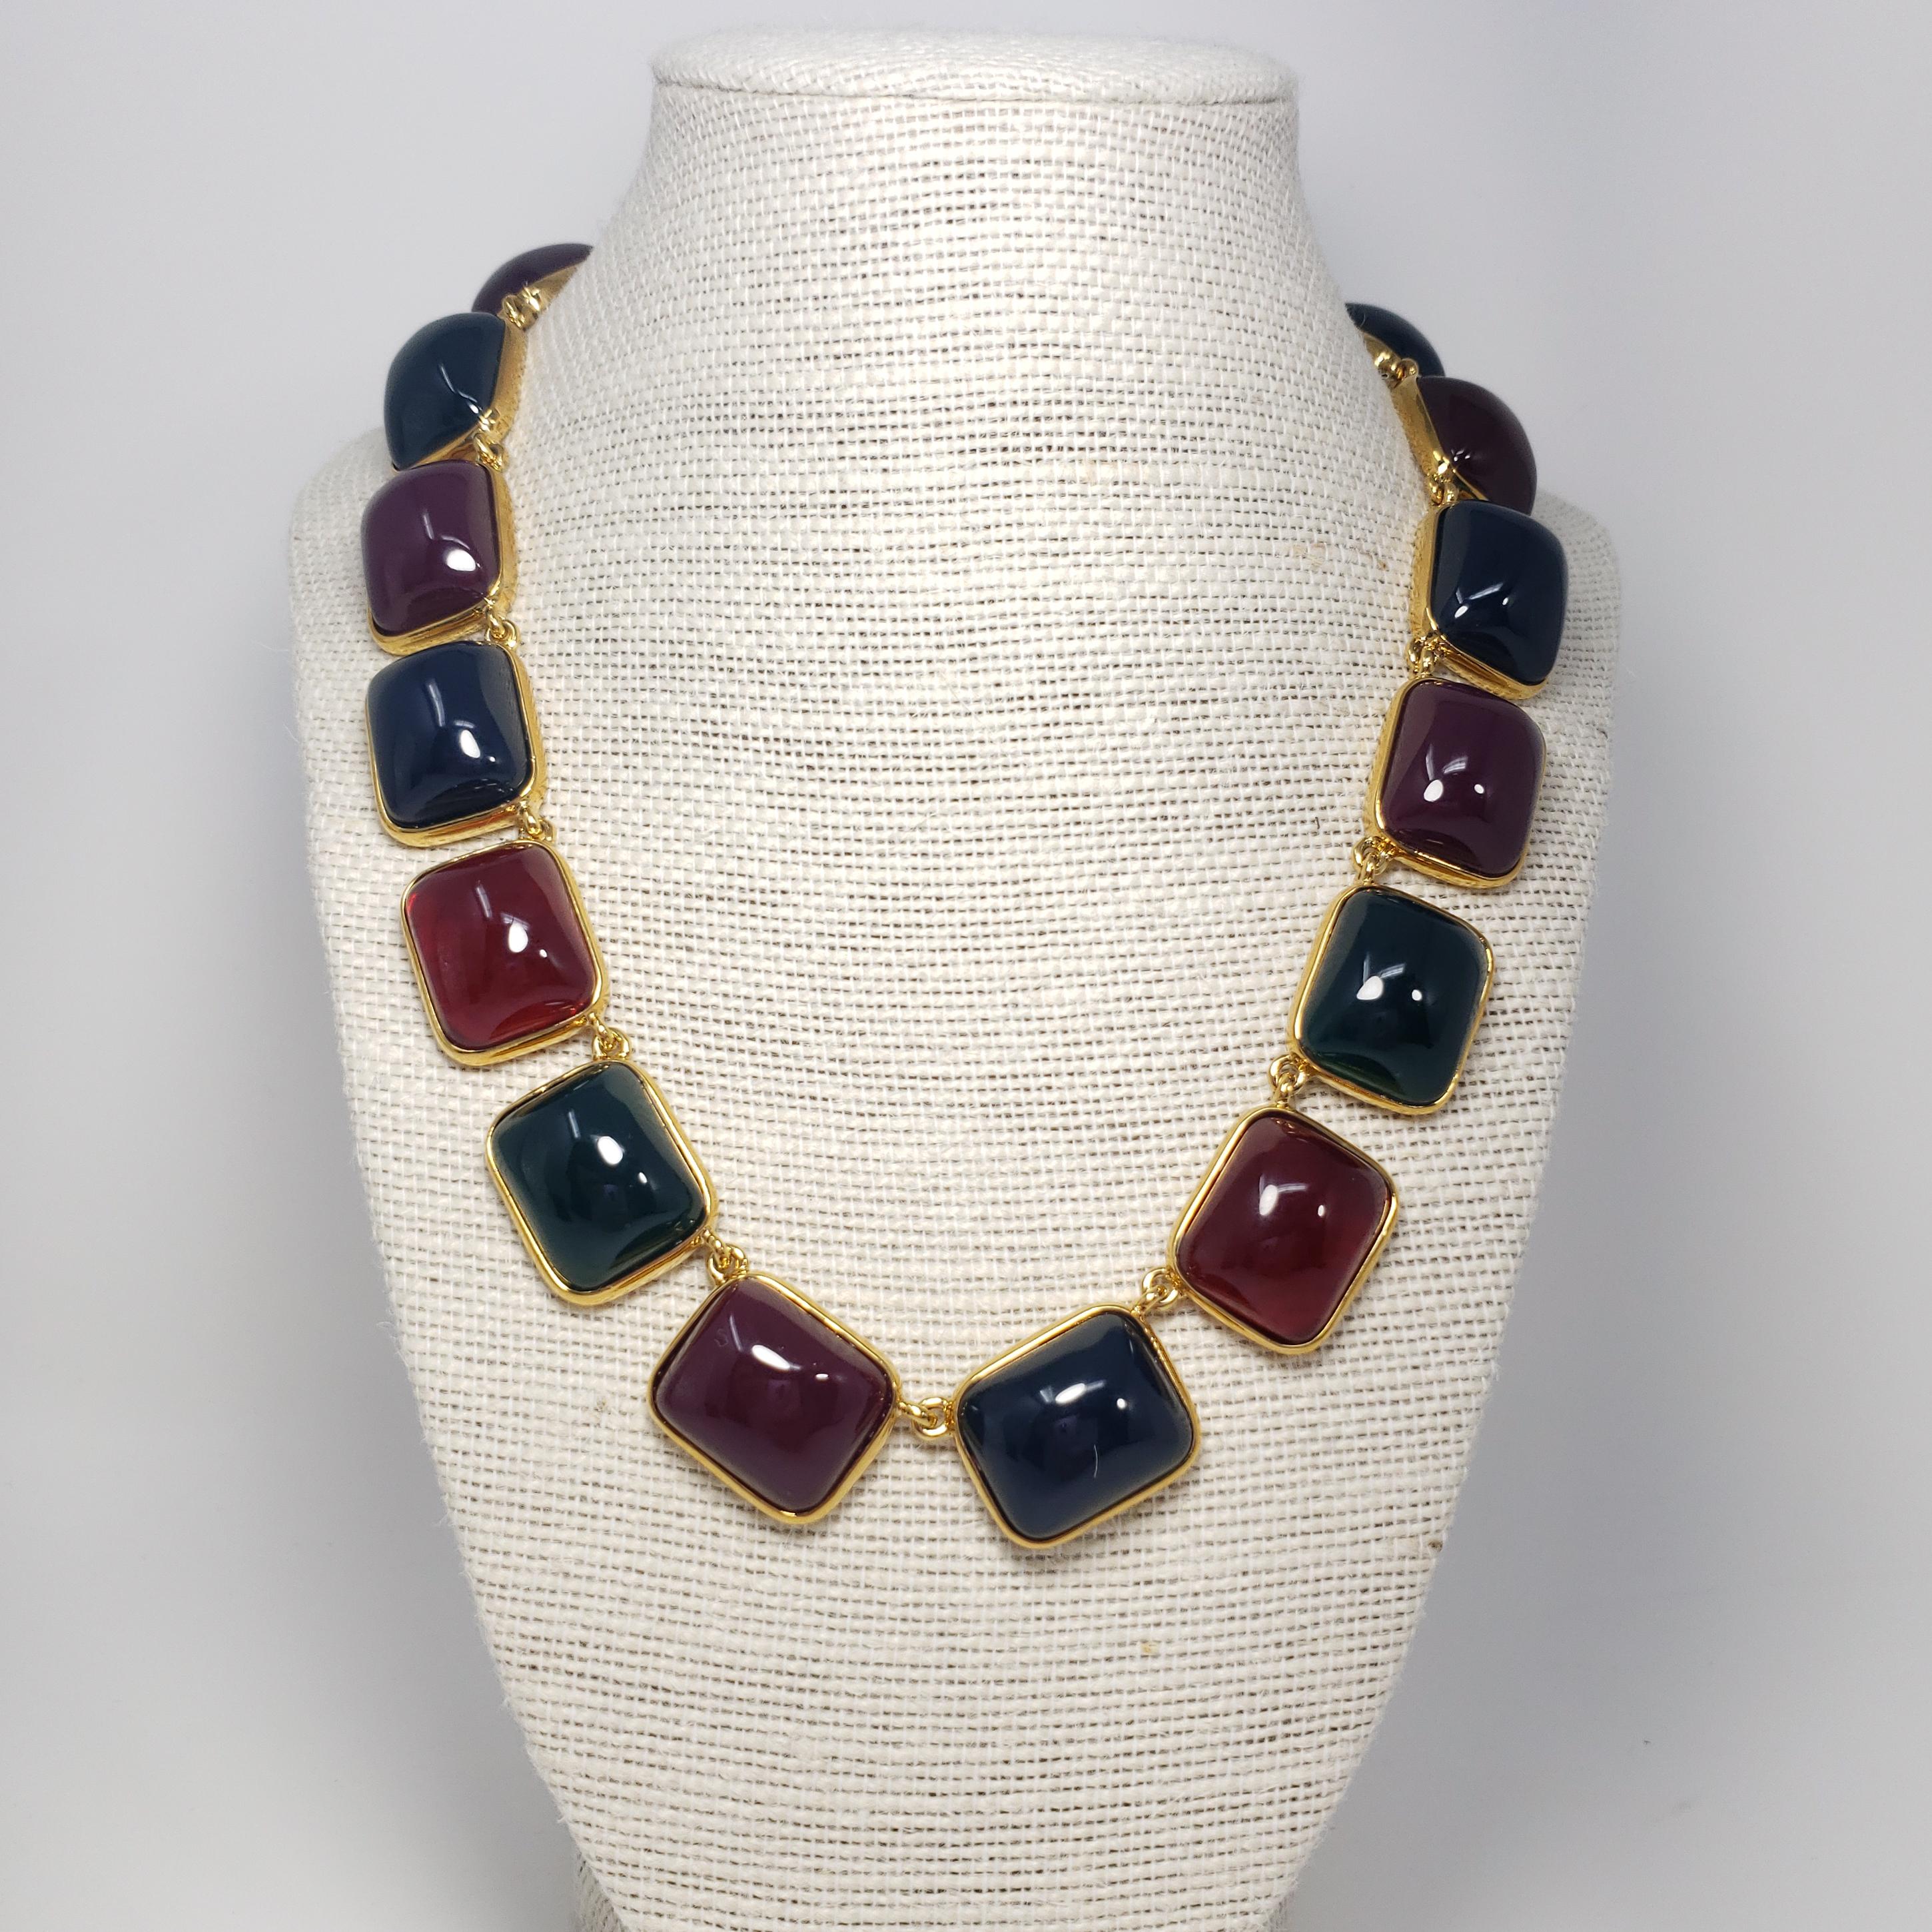  A stylish Kenneth Jay Lane necklace, featuring opaque green, red, and blue cabochons set in open-back gold-plated bezels. 

43.5 cm Length + 7 cm extension chain

Hallmarks: KJL, China